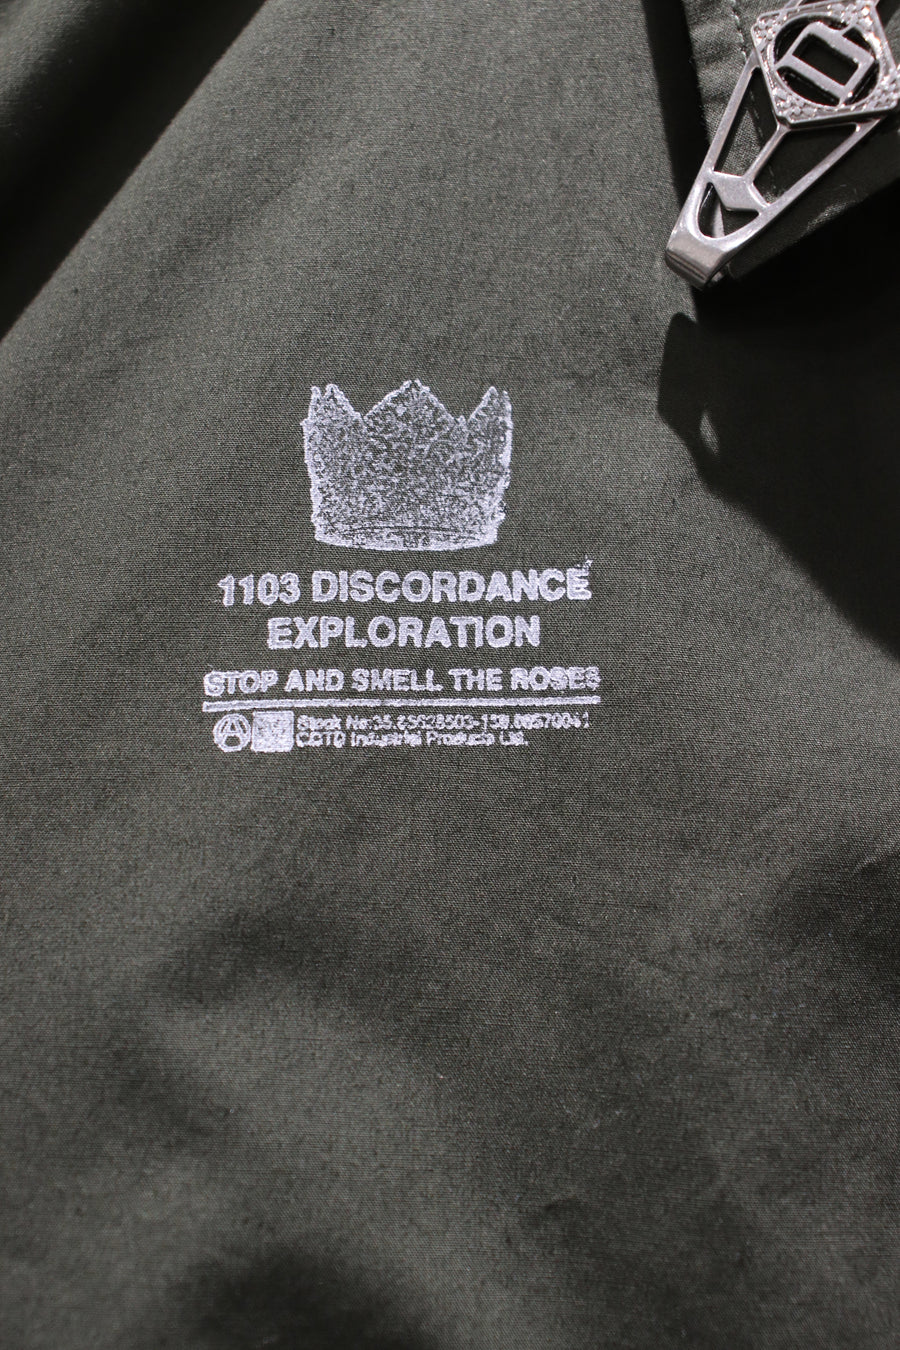 Children of the discordance  OVERSIZED STAMPED SHIRT